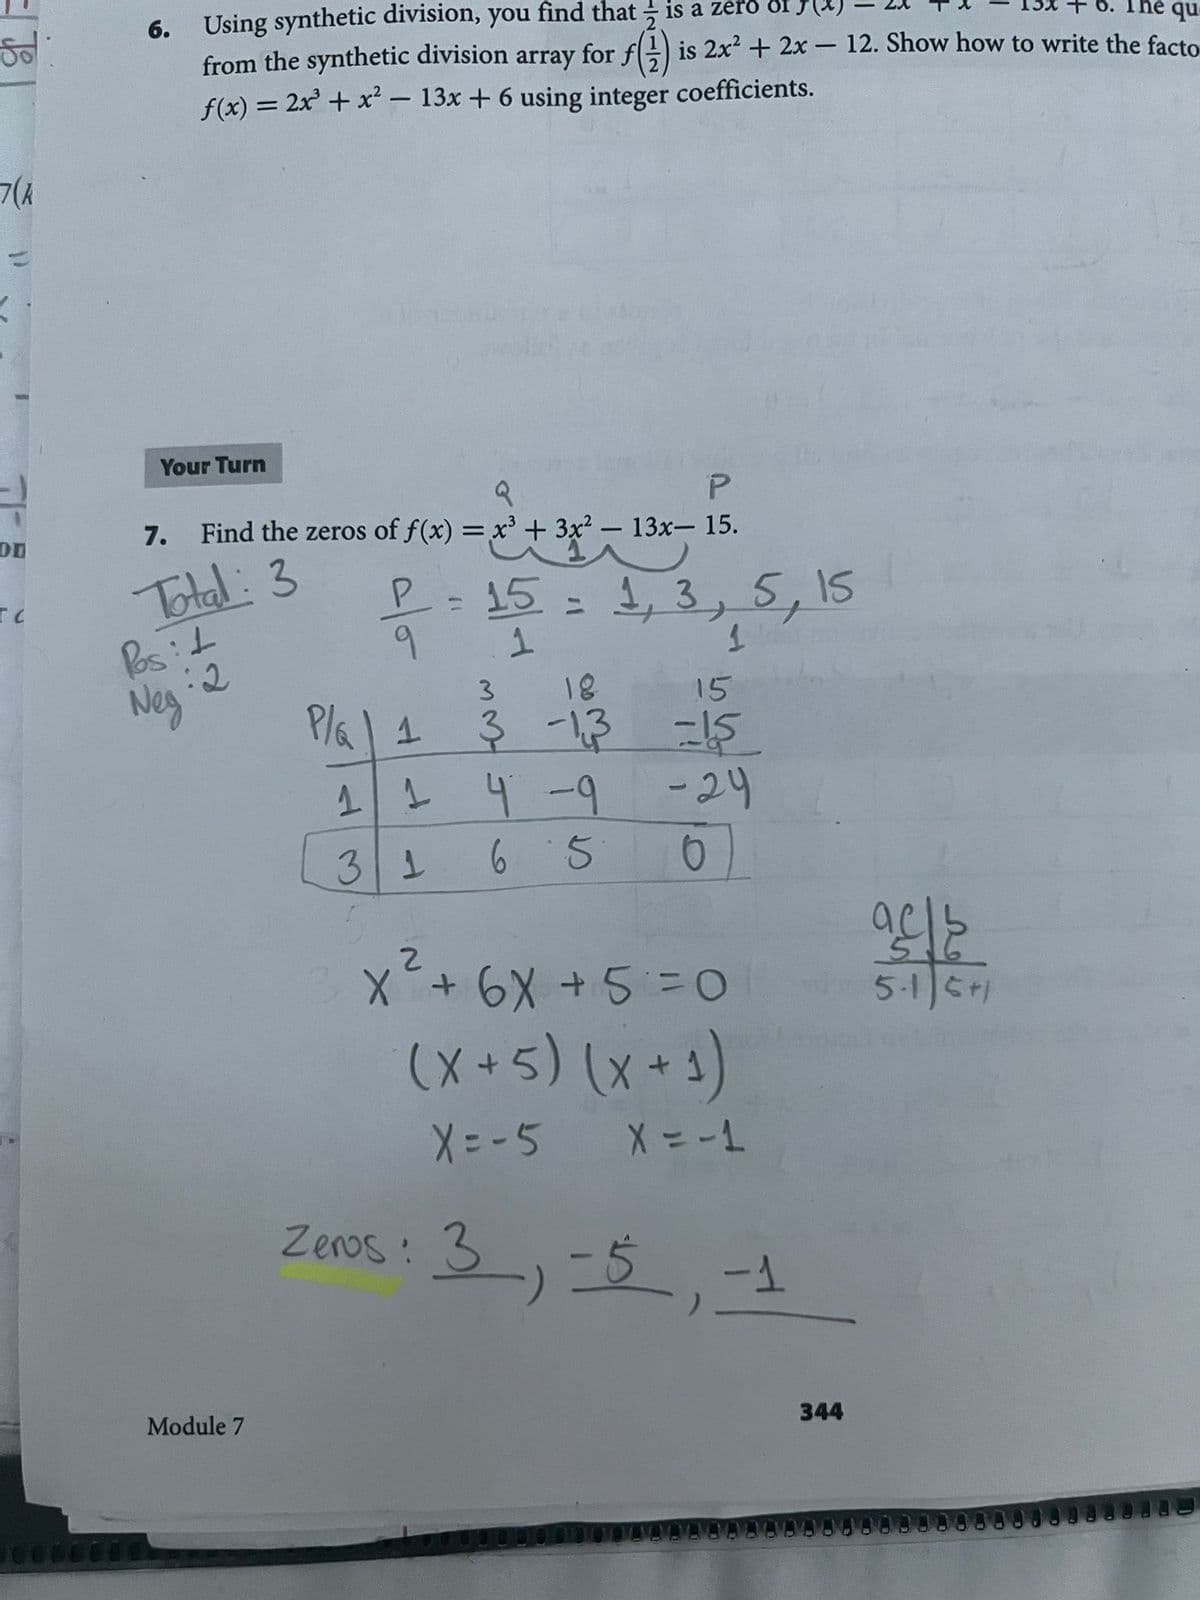 Using synthetic division, you find that is a zero or
from the synthetic division array for f) is 2x² + 2x– 12. Show how to write the facto
6.
6. The que
-
f(x) = 2x + x² – 13x + 6 using integer coefficients.
Your Turn
P.
Find the zeros of f(x) = x' + 3x² – 13x- 15.
7.
ど+
R-15=
9.
%3D
Total: 3
1, 3, 5,15
Neg 2
18
15
Plal 1 3 -13 -IS
4 -9
-24
31
5-1 6
(x+5) (x +3)
Zeos: 3_)こ5 ,-2
Module 7
344
